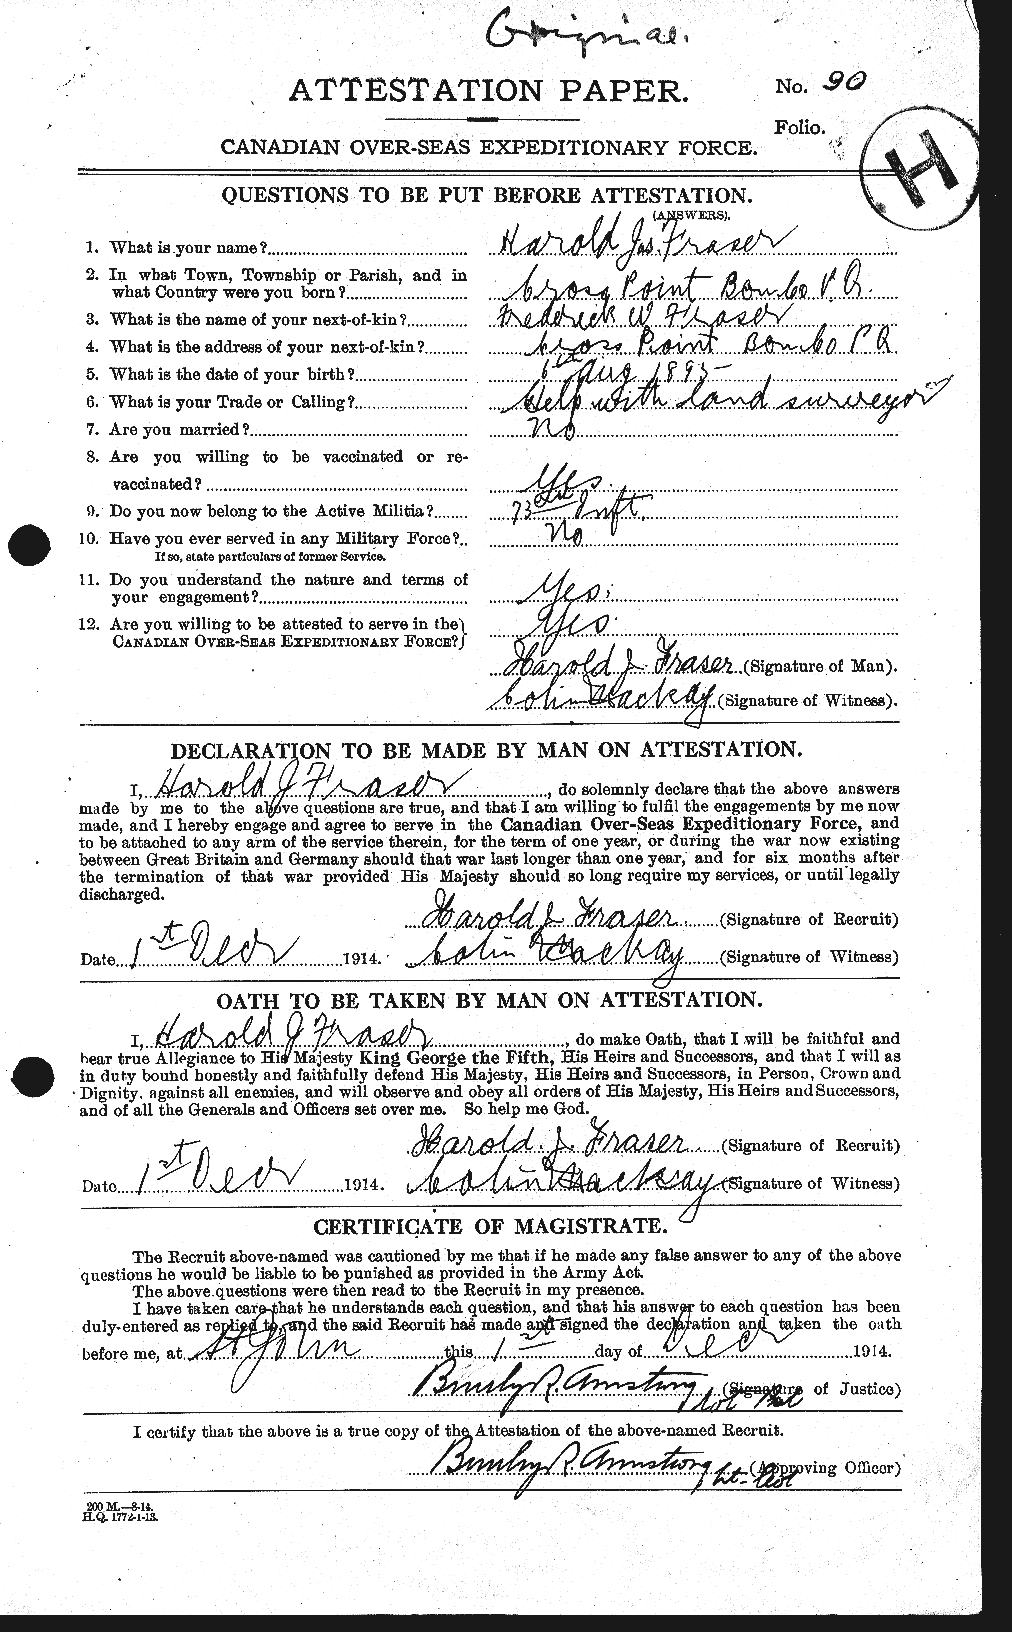 Personnel Records of the First World War - CEF 332161a